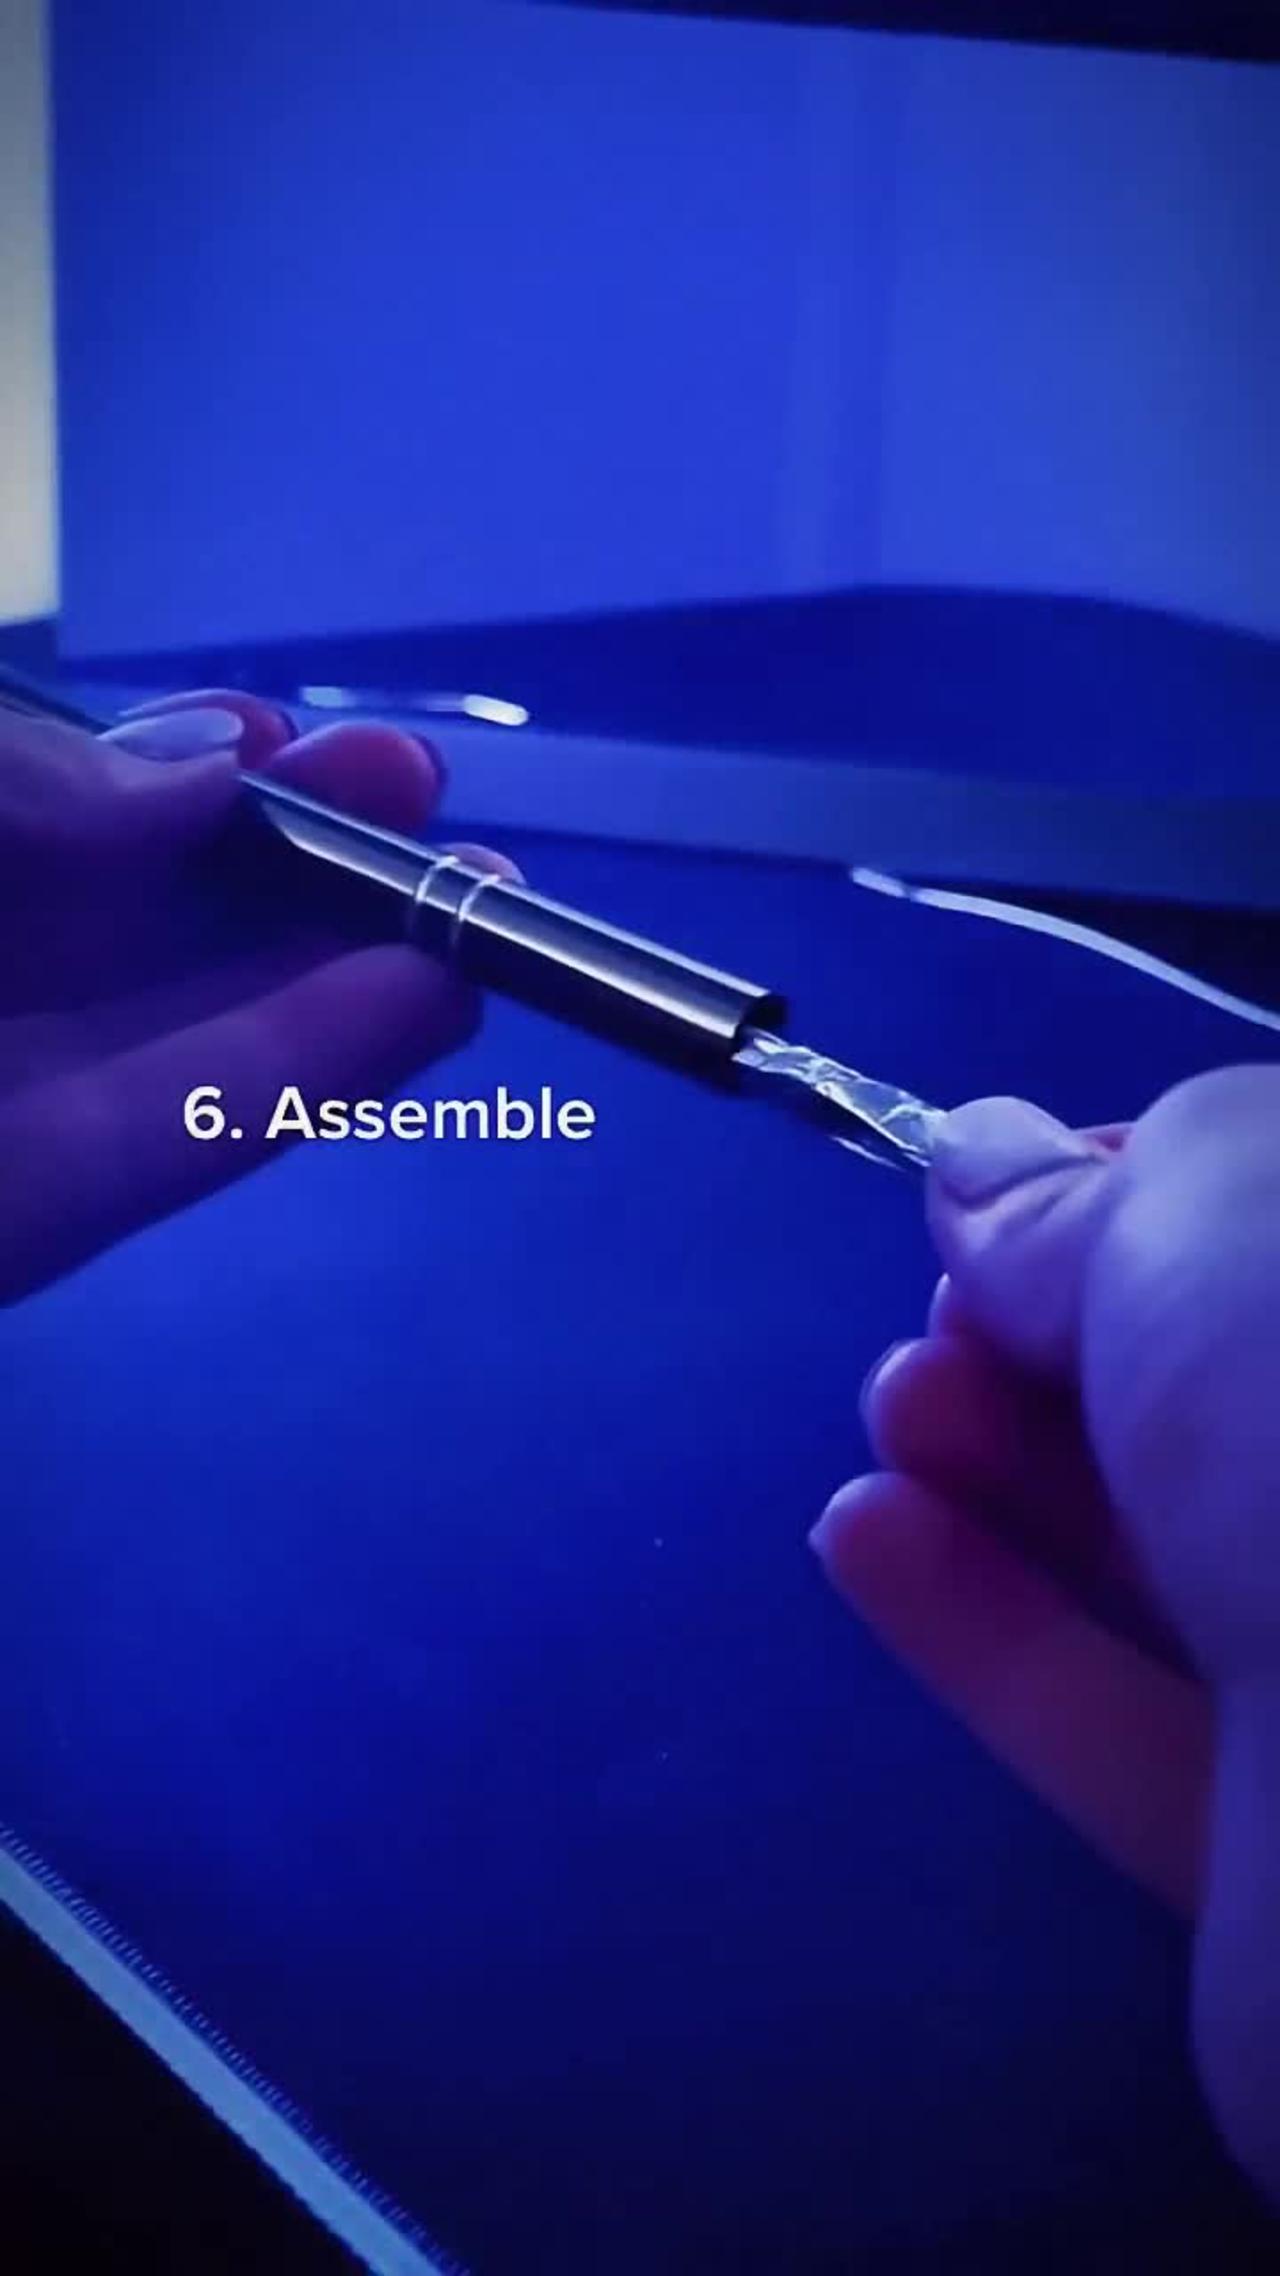 You can MAKE an Apple Pencil Like This